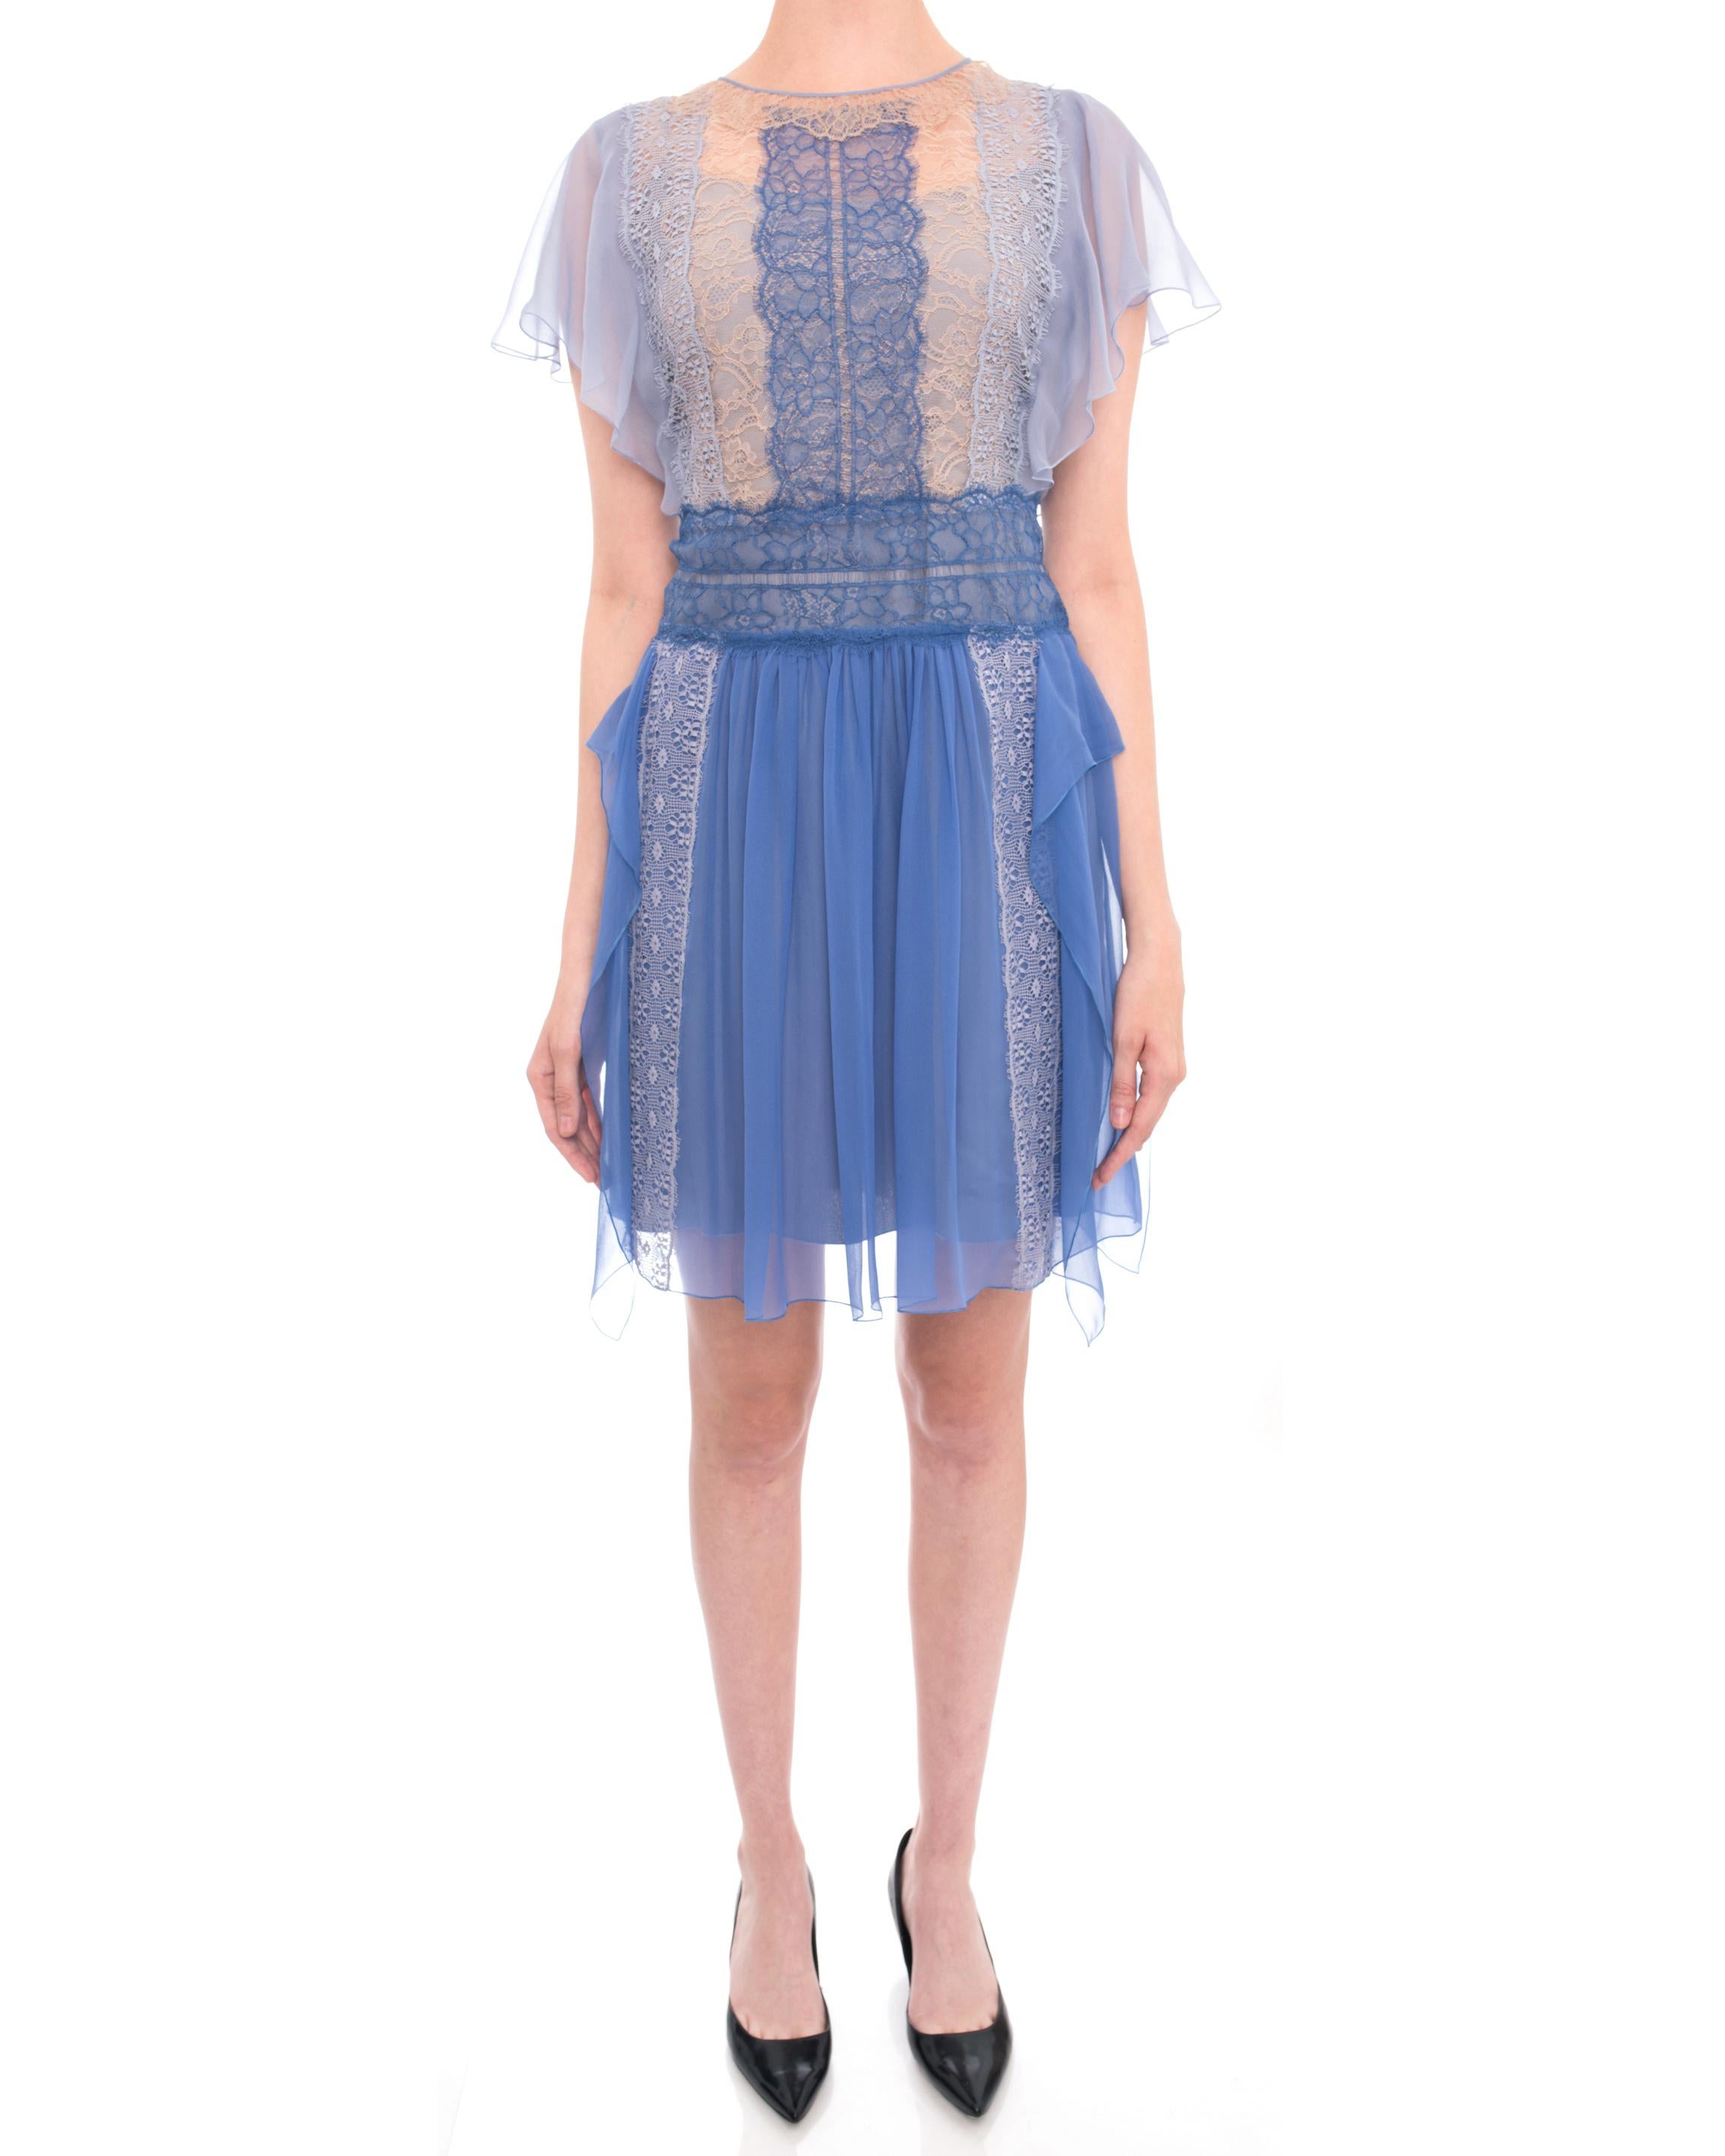 Alberta Ferretti Light Blue Silk Chiffon Ruffle Flapper Dress with Lace.  From the resort 2016 collection. 1920’s inspired design with ruffles and lace inset.  Matching silk slip dress is included. Marked size IT44 / FR40 / USA 8. Garment bust